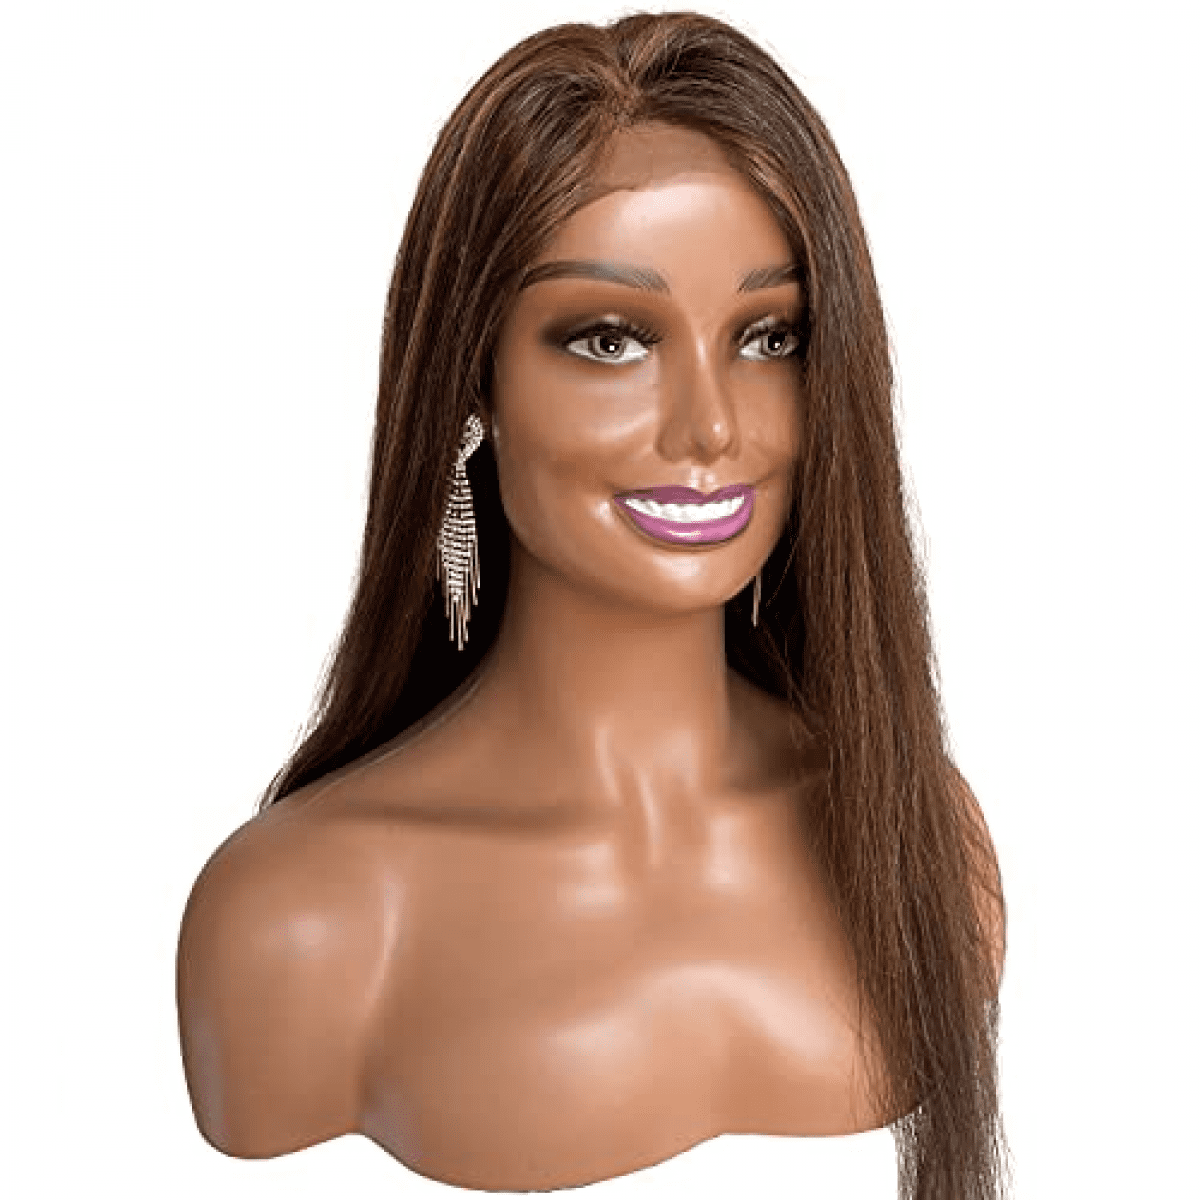 17-inch Female Mannequin Head Form with Eyelashes and Lips Display Stand  for Wigs, Hats, Jewelry